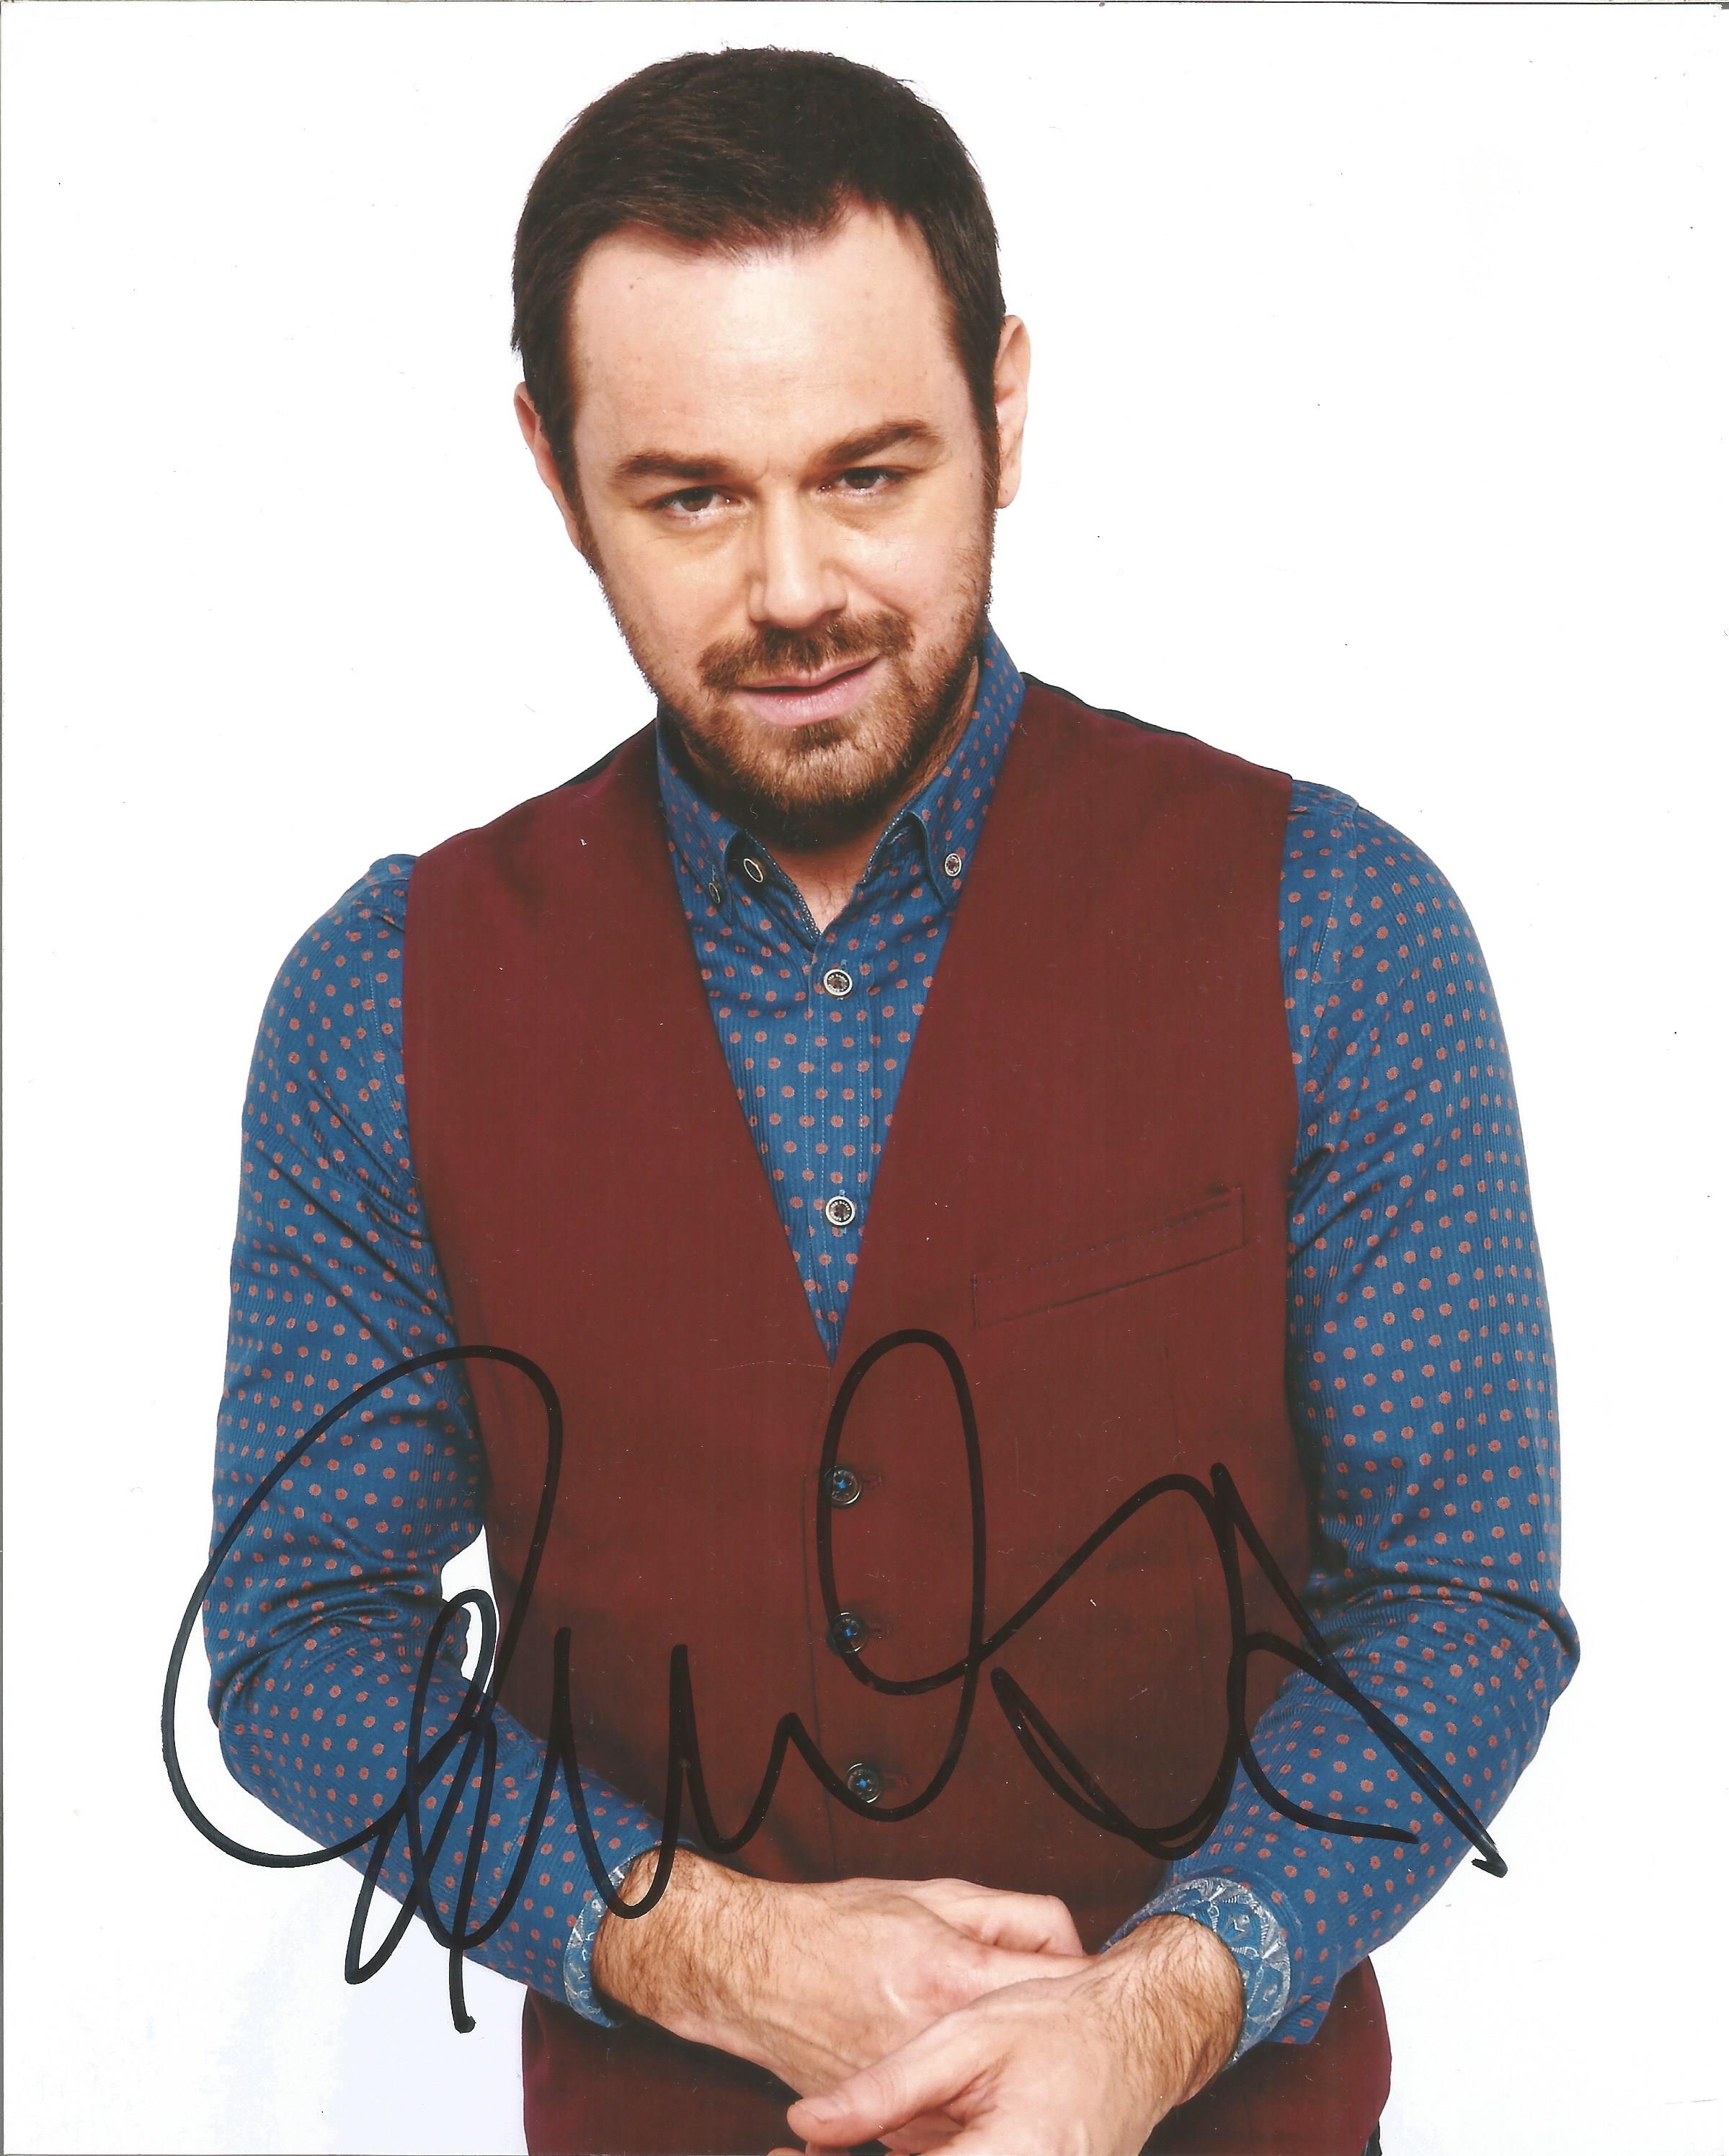 Danny Dyer signed 10x8 colour photo. Daniel John Dyer (born 24 July 1977) is an English actor and